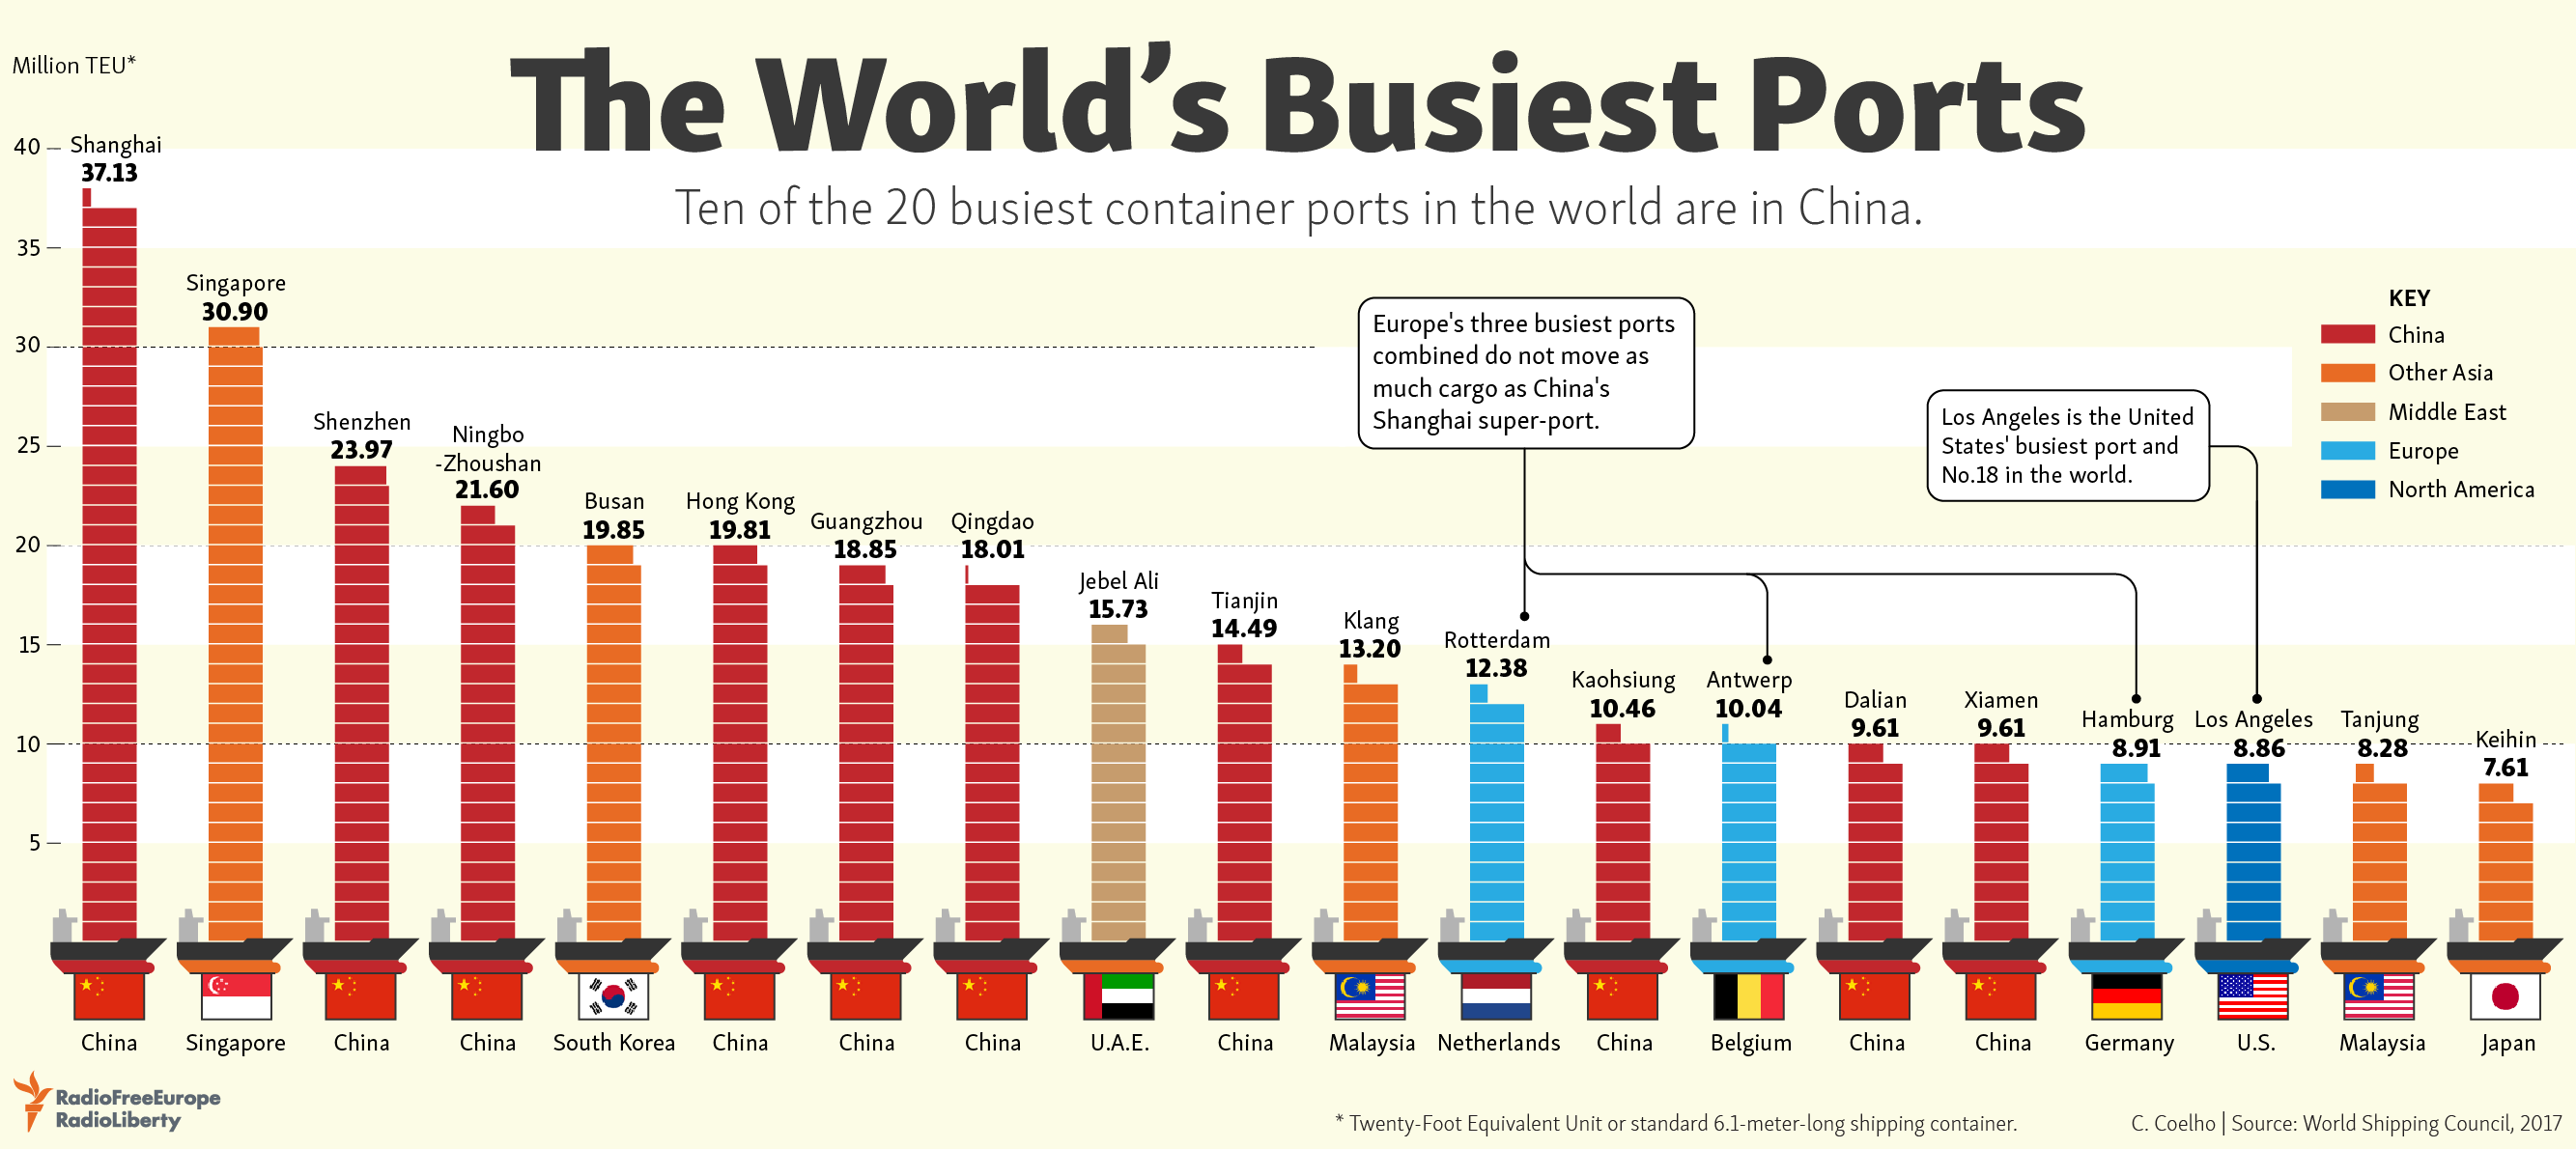 The World’s Busiest Ports